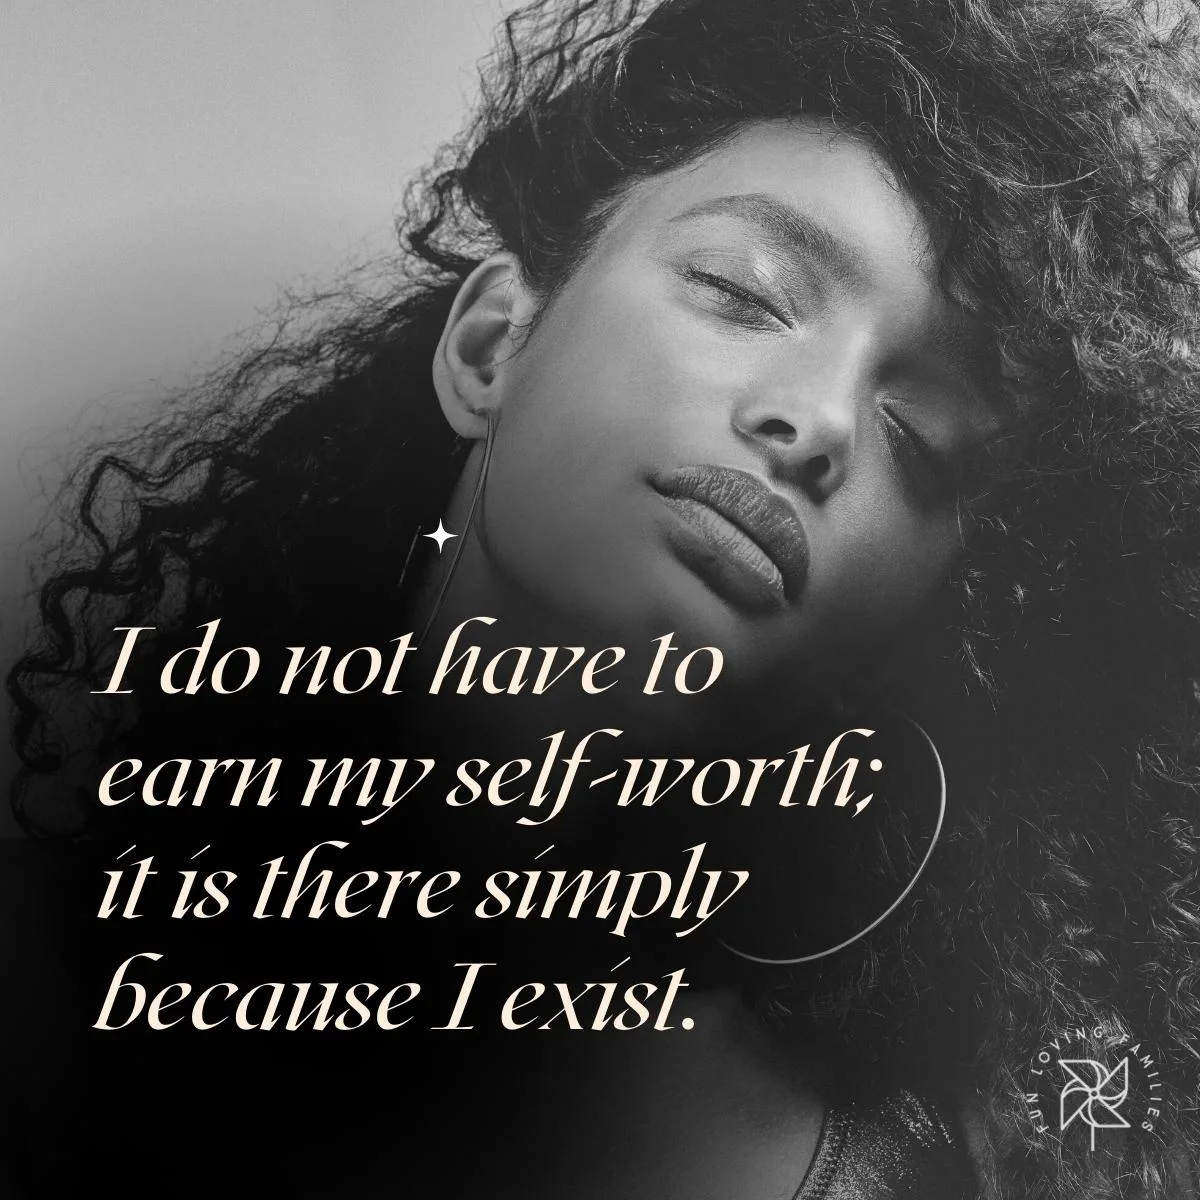 I do not have to earn my self-worth; it is there simply because I exist affirmation